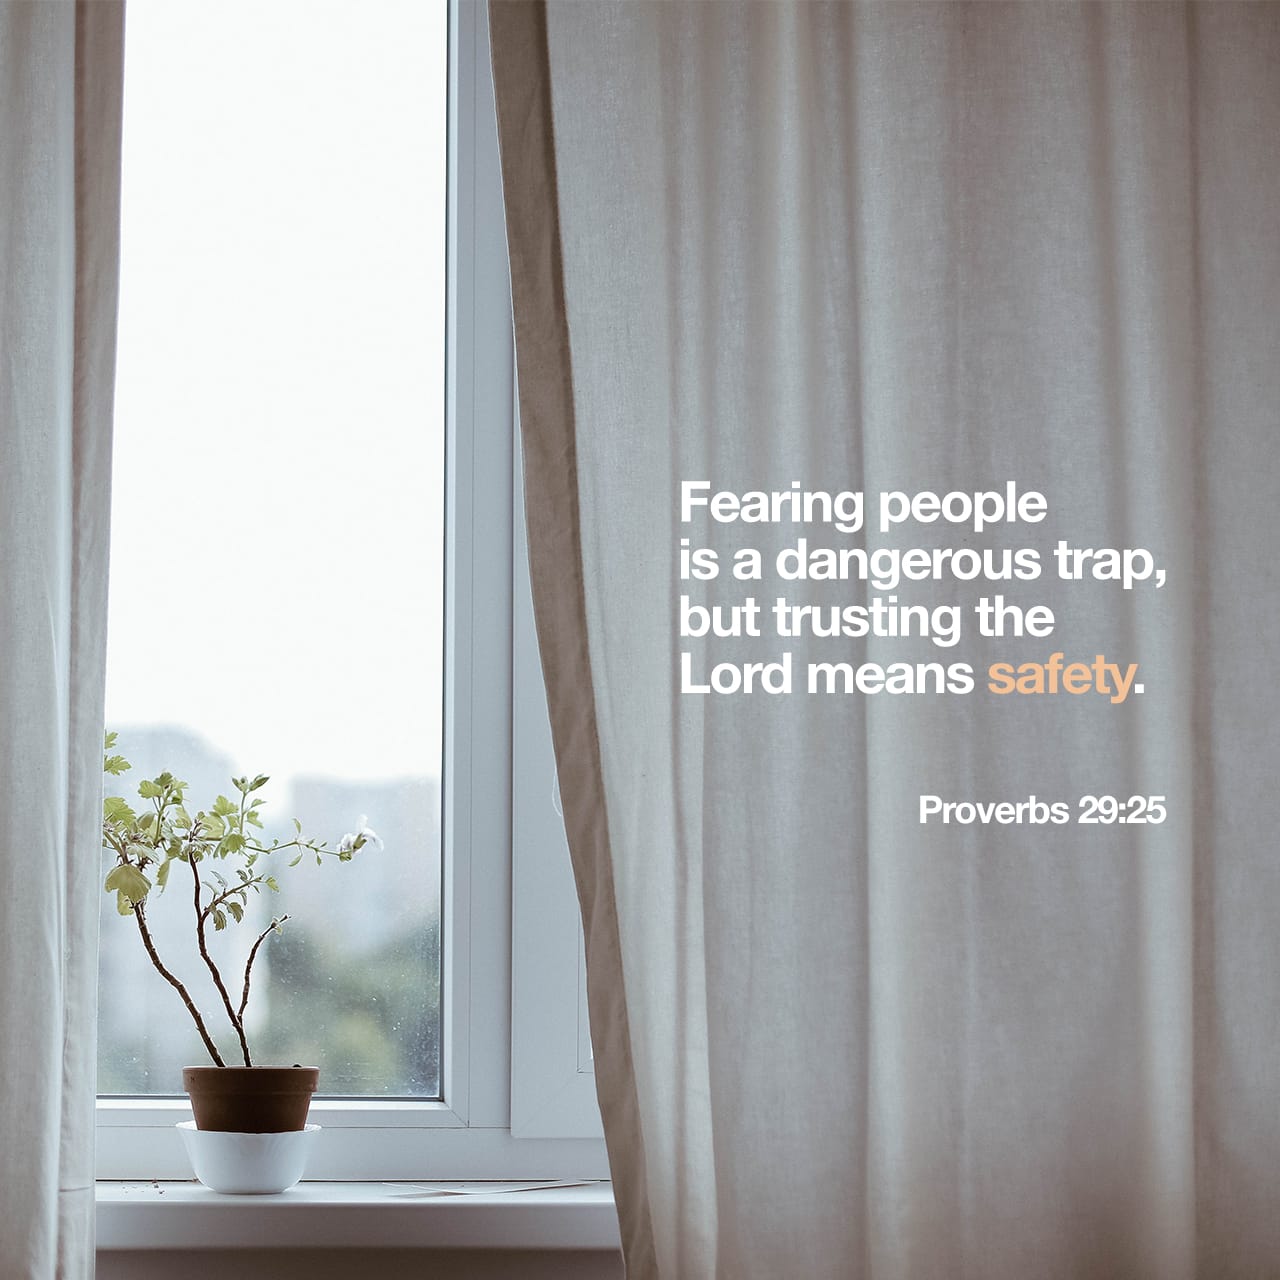 Fearing people is a dangerous trap, but trusting the Lord means safety: Proverbs 29.25